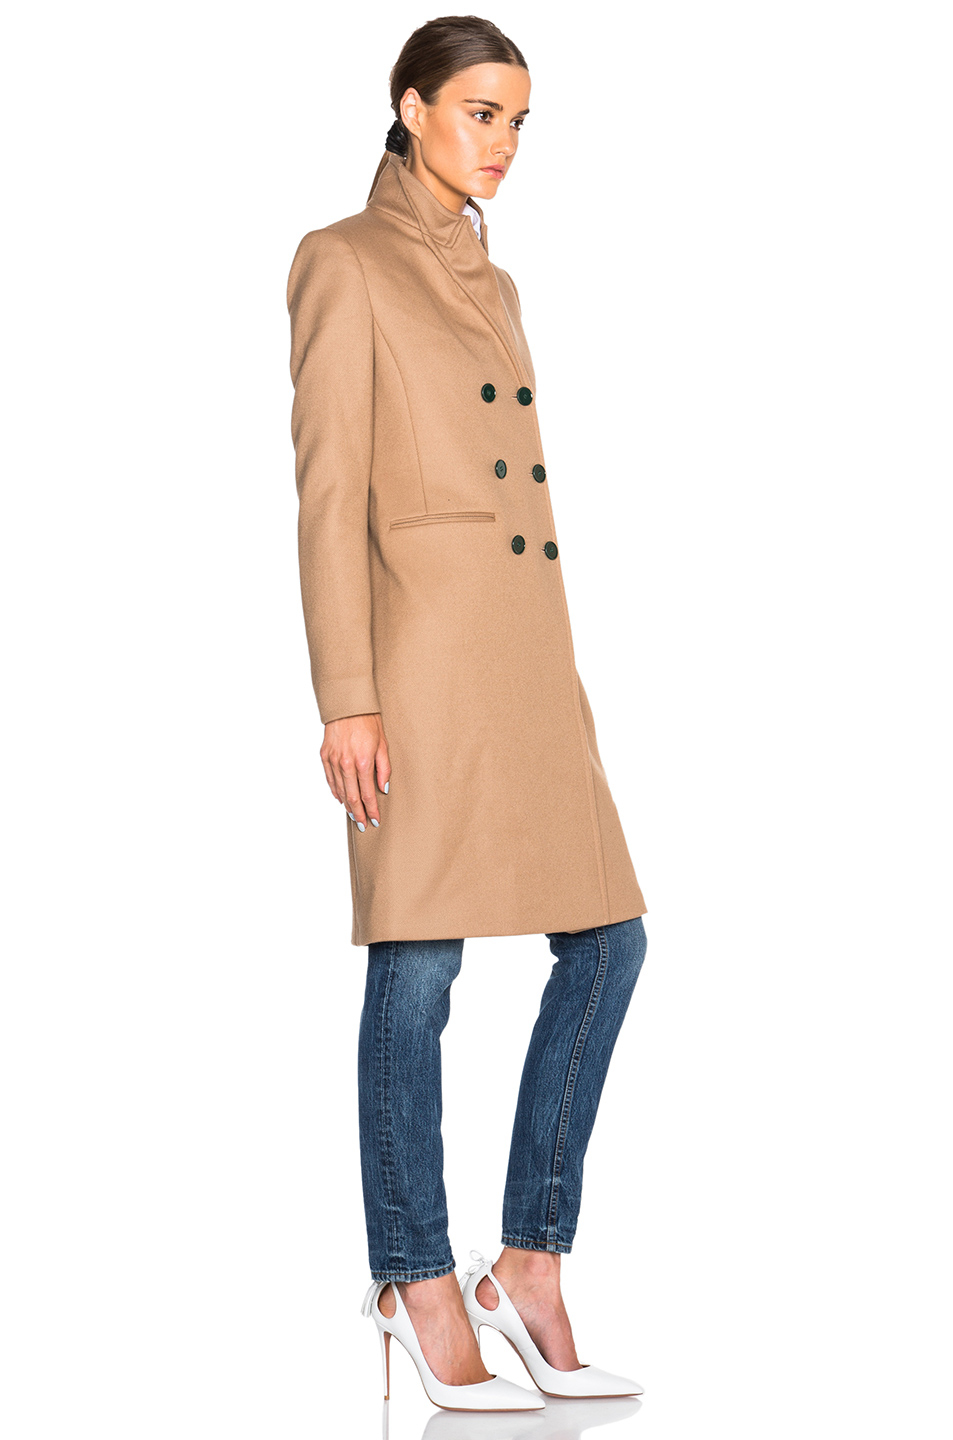 Victoria Beckham Wool Twill Double Breasted Coat in Camel (Natural 